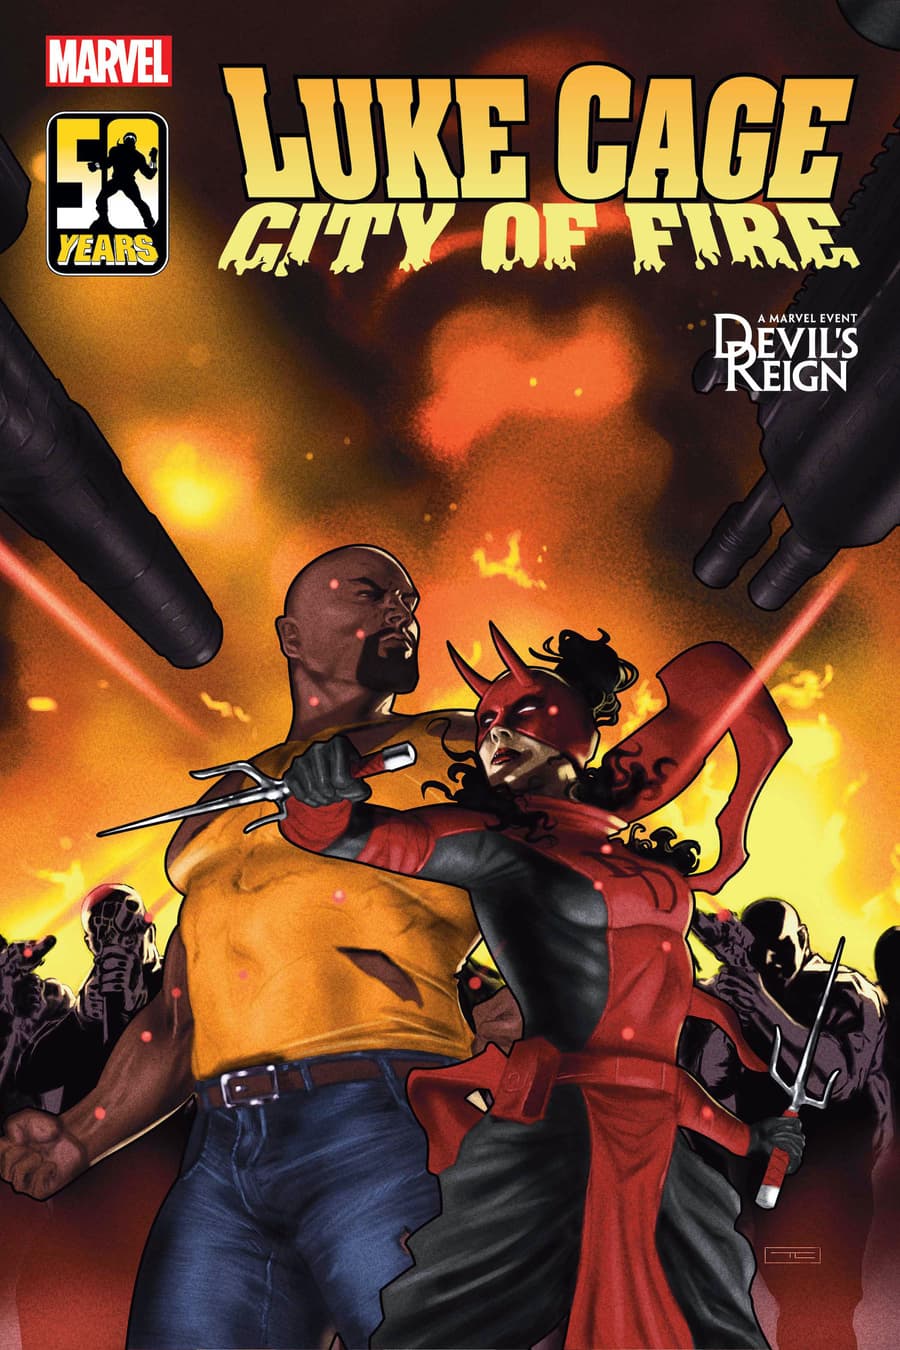 LUKE CAGE: CITY OF FIRE #2 Cover by TAURIN CLARKE